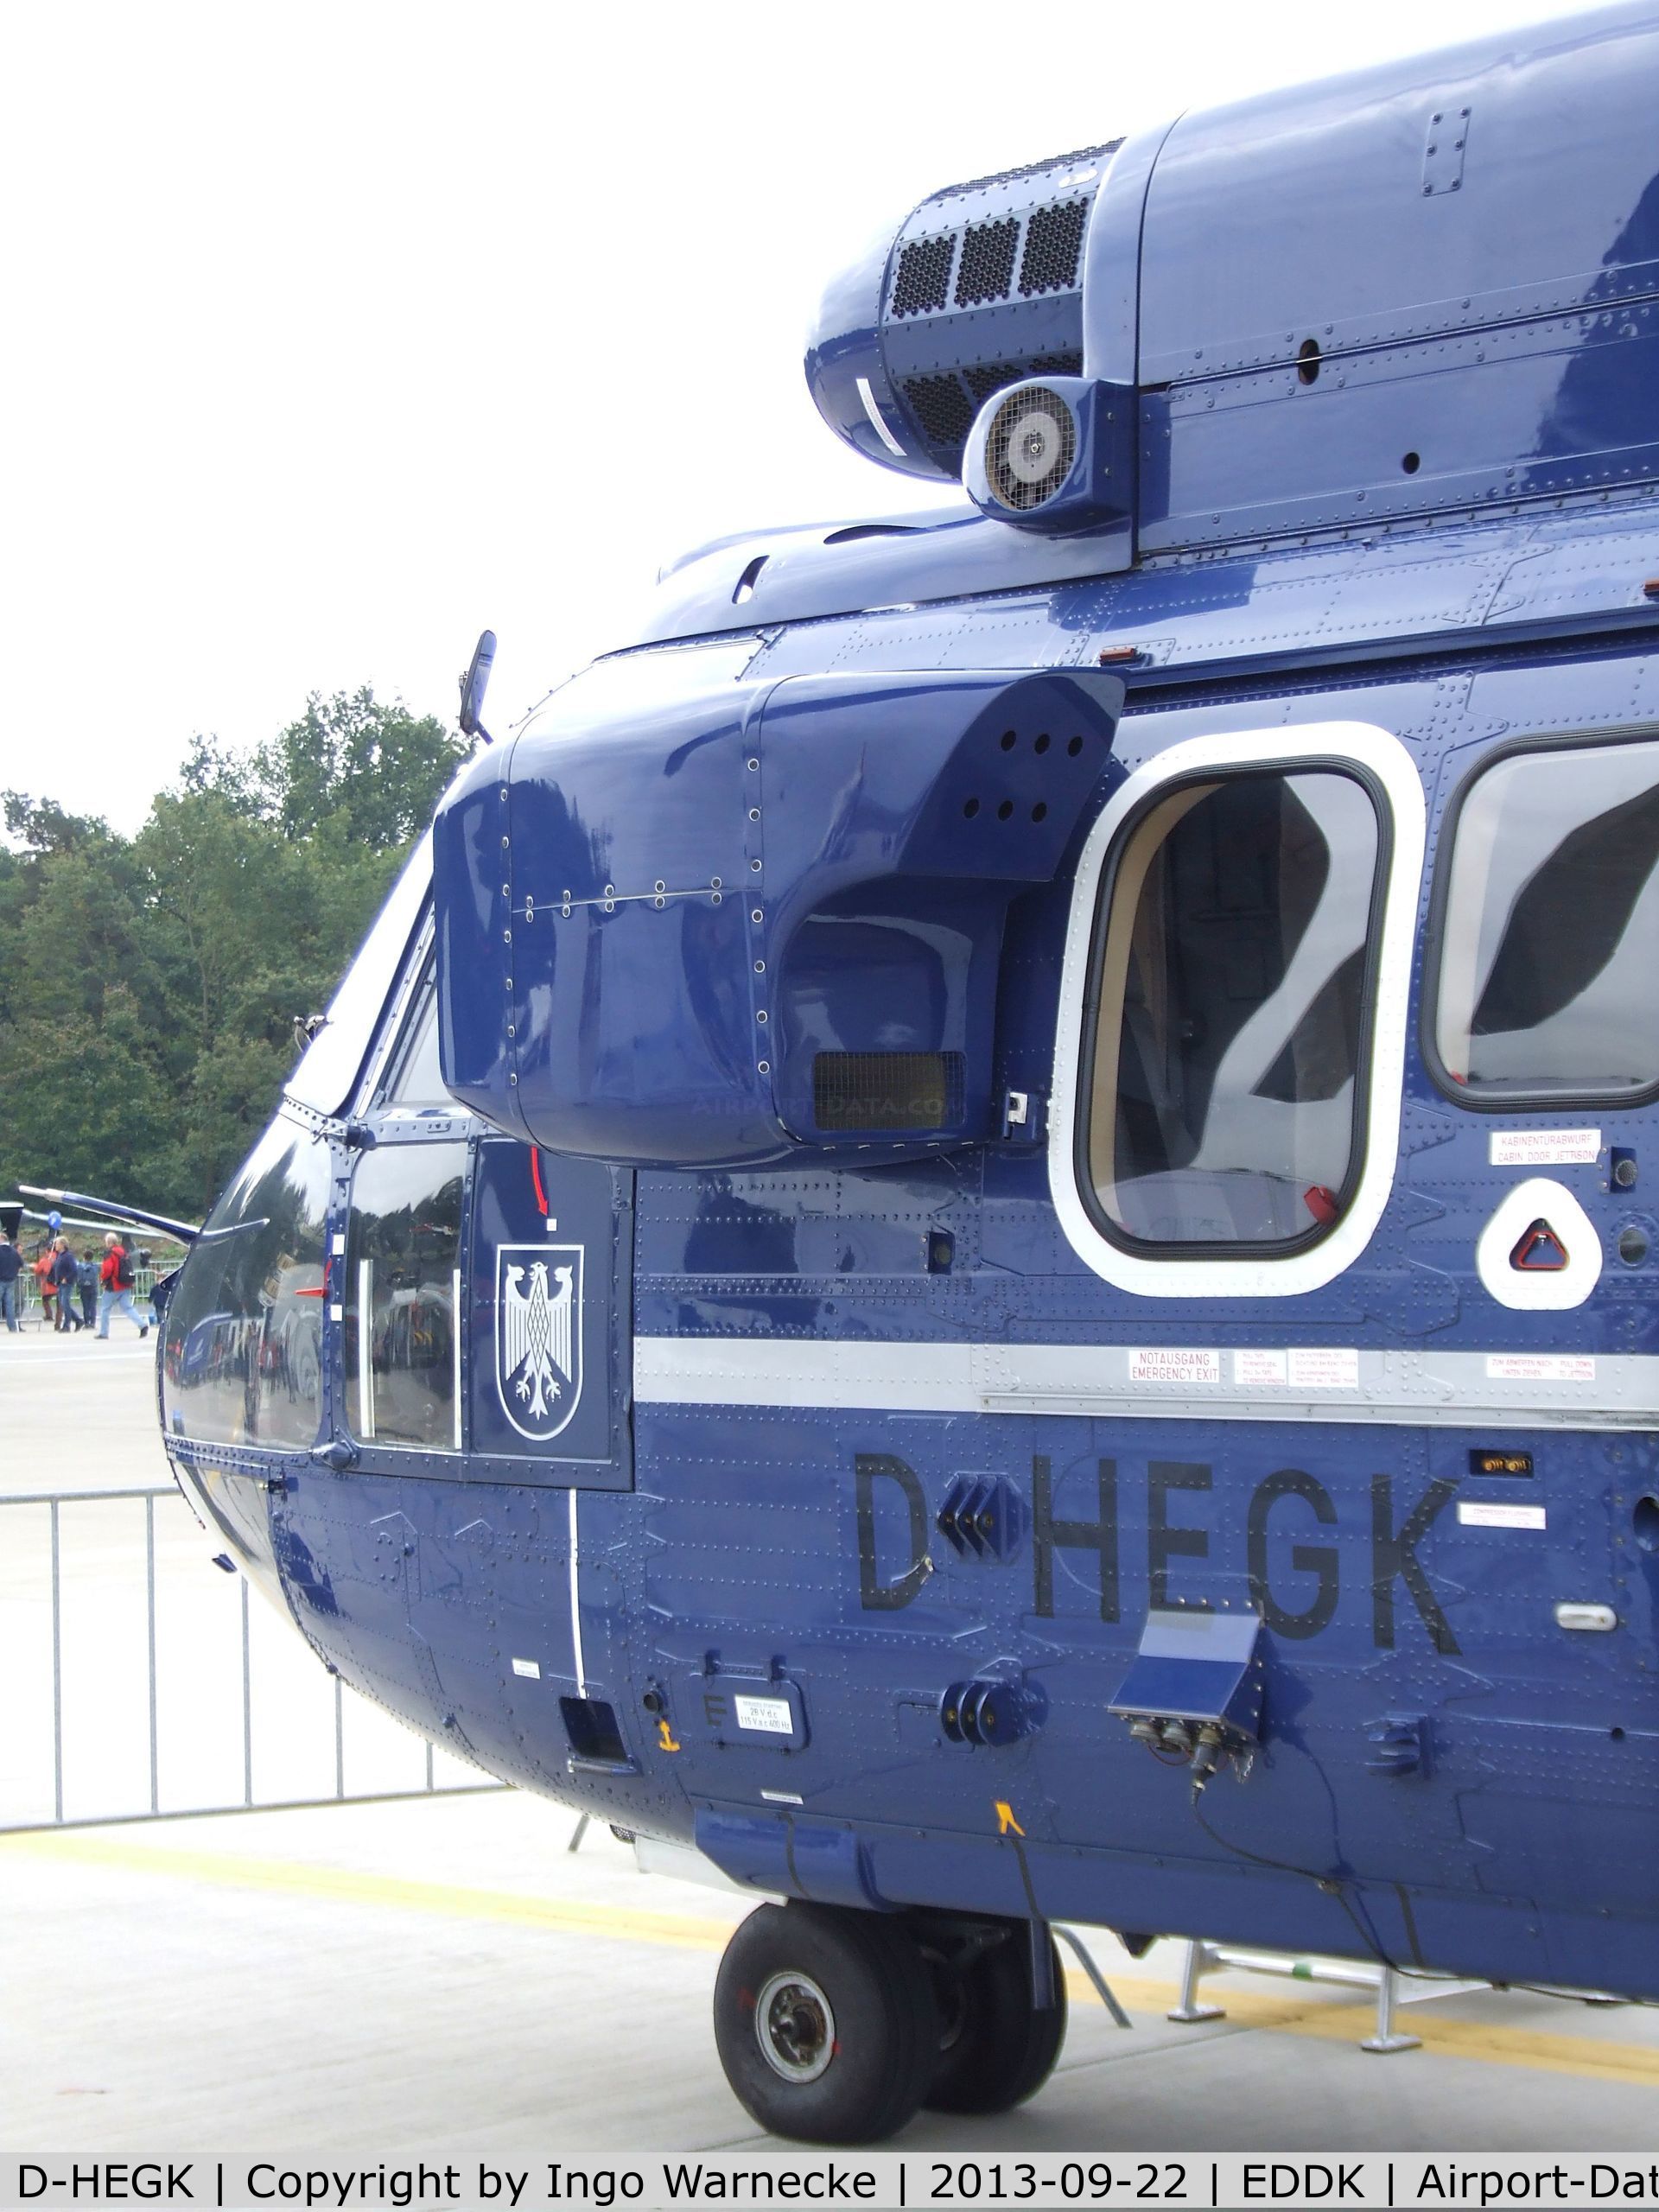 D-HEGK, 2009 Aerospatiale AS-332L-1 Super Puma C/N 2720, Aerospatiale AS.332L1 Super Puma of the German federal police (Bundespolizei) at the DLR 2013 air and space day on the side of Cologne airport